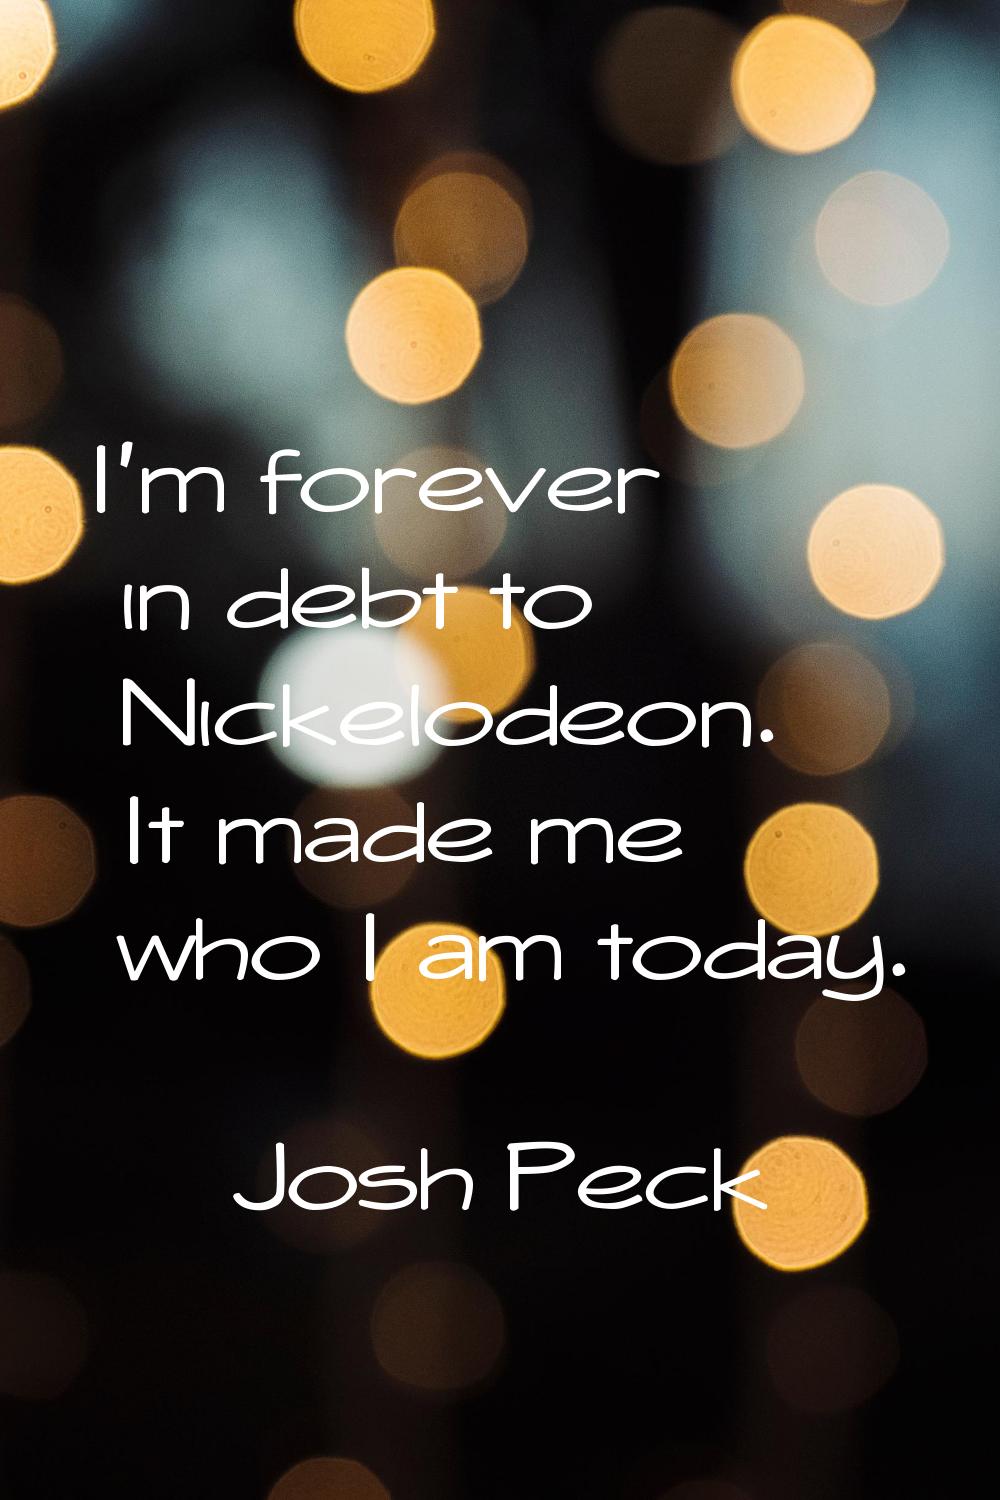 I'm forever in debt to Nickelodeon. It made me who I am today.